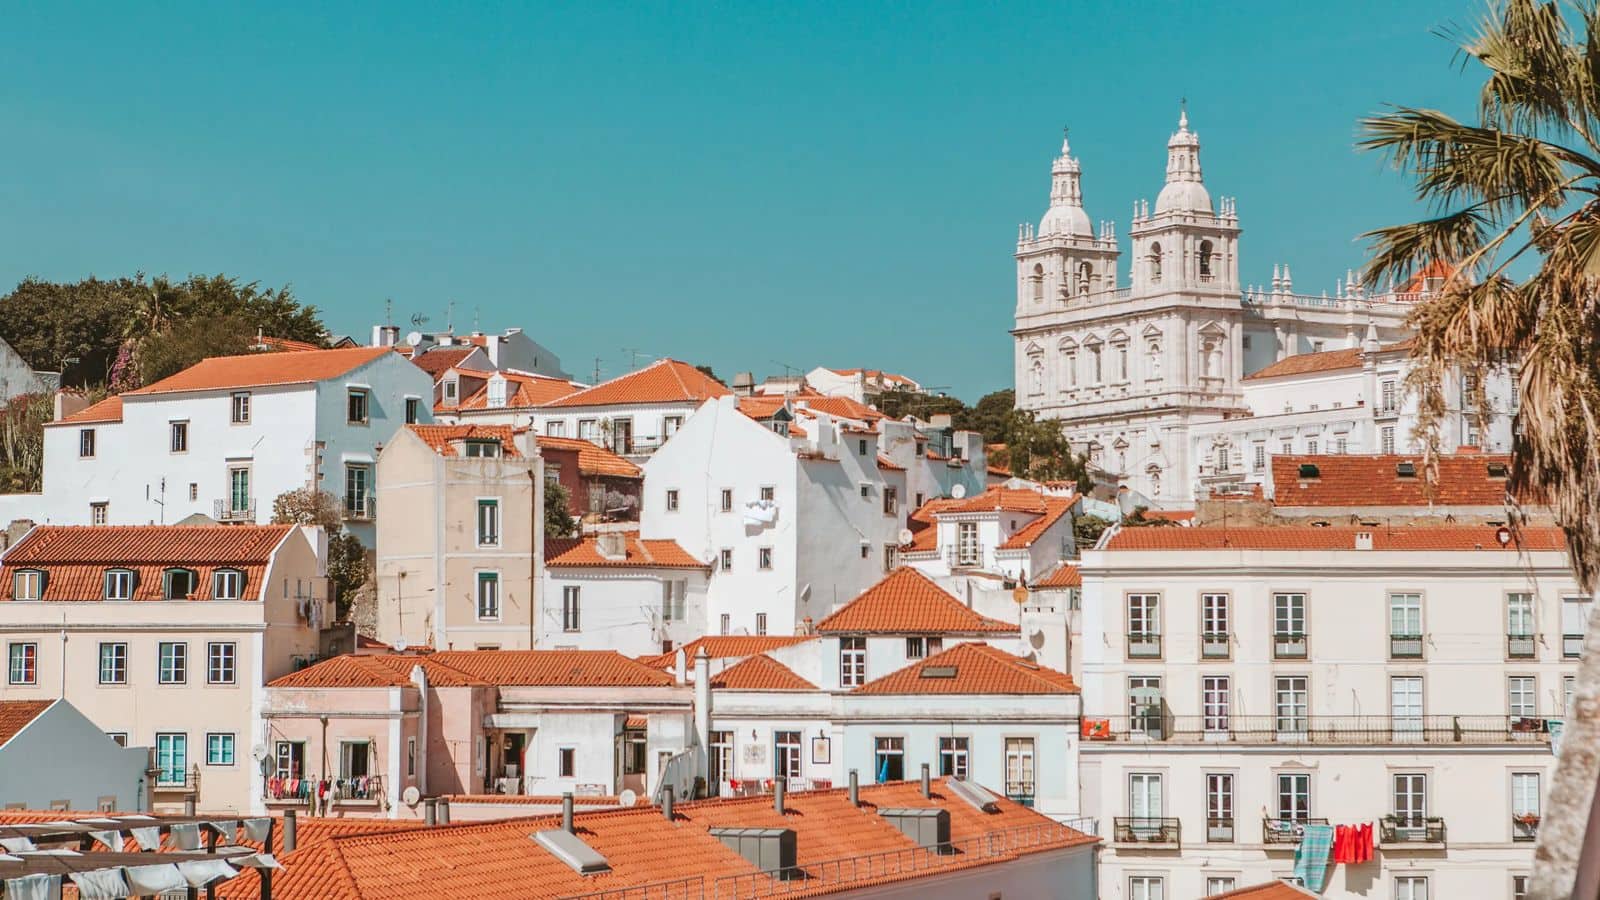 Explore Lisbon by tram and viewpoints with this travel guide